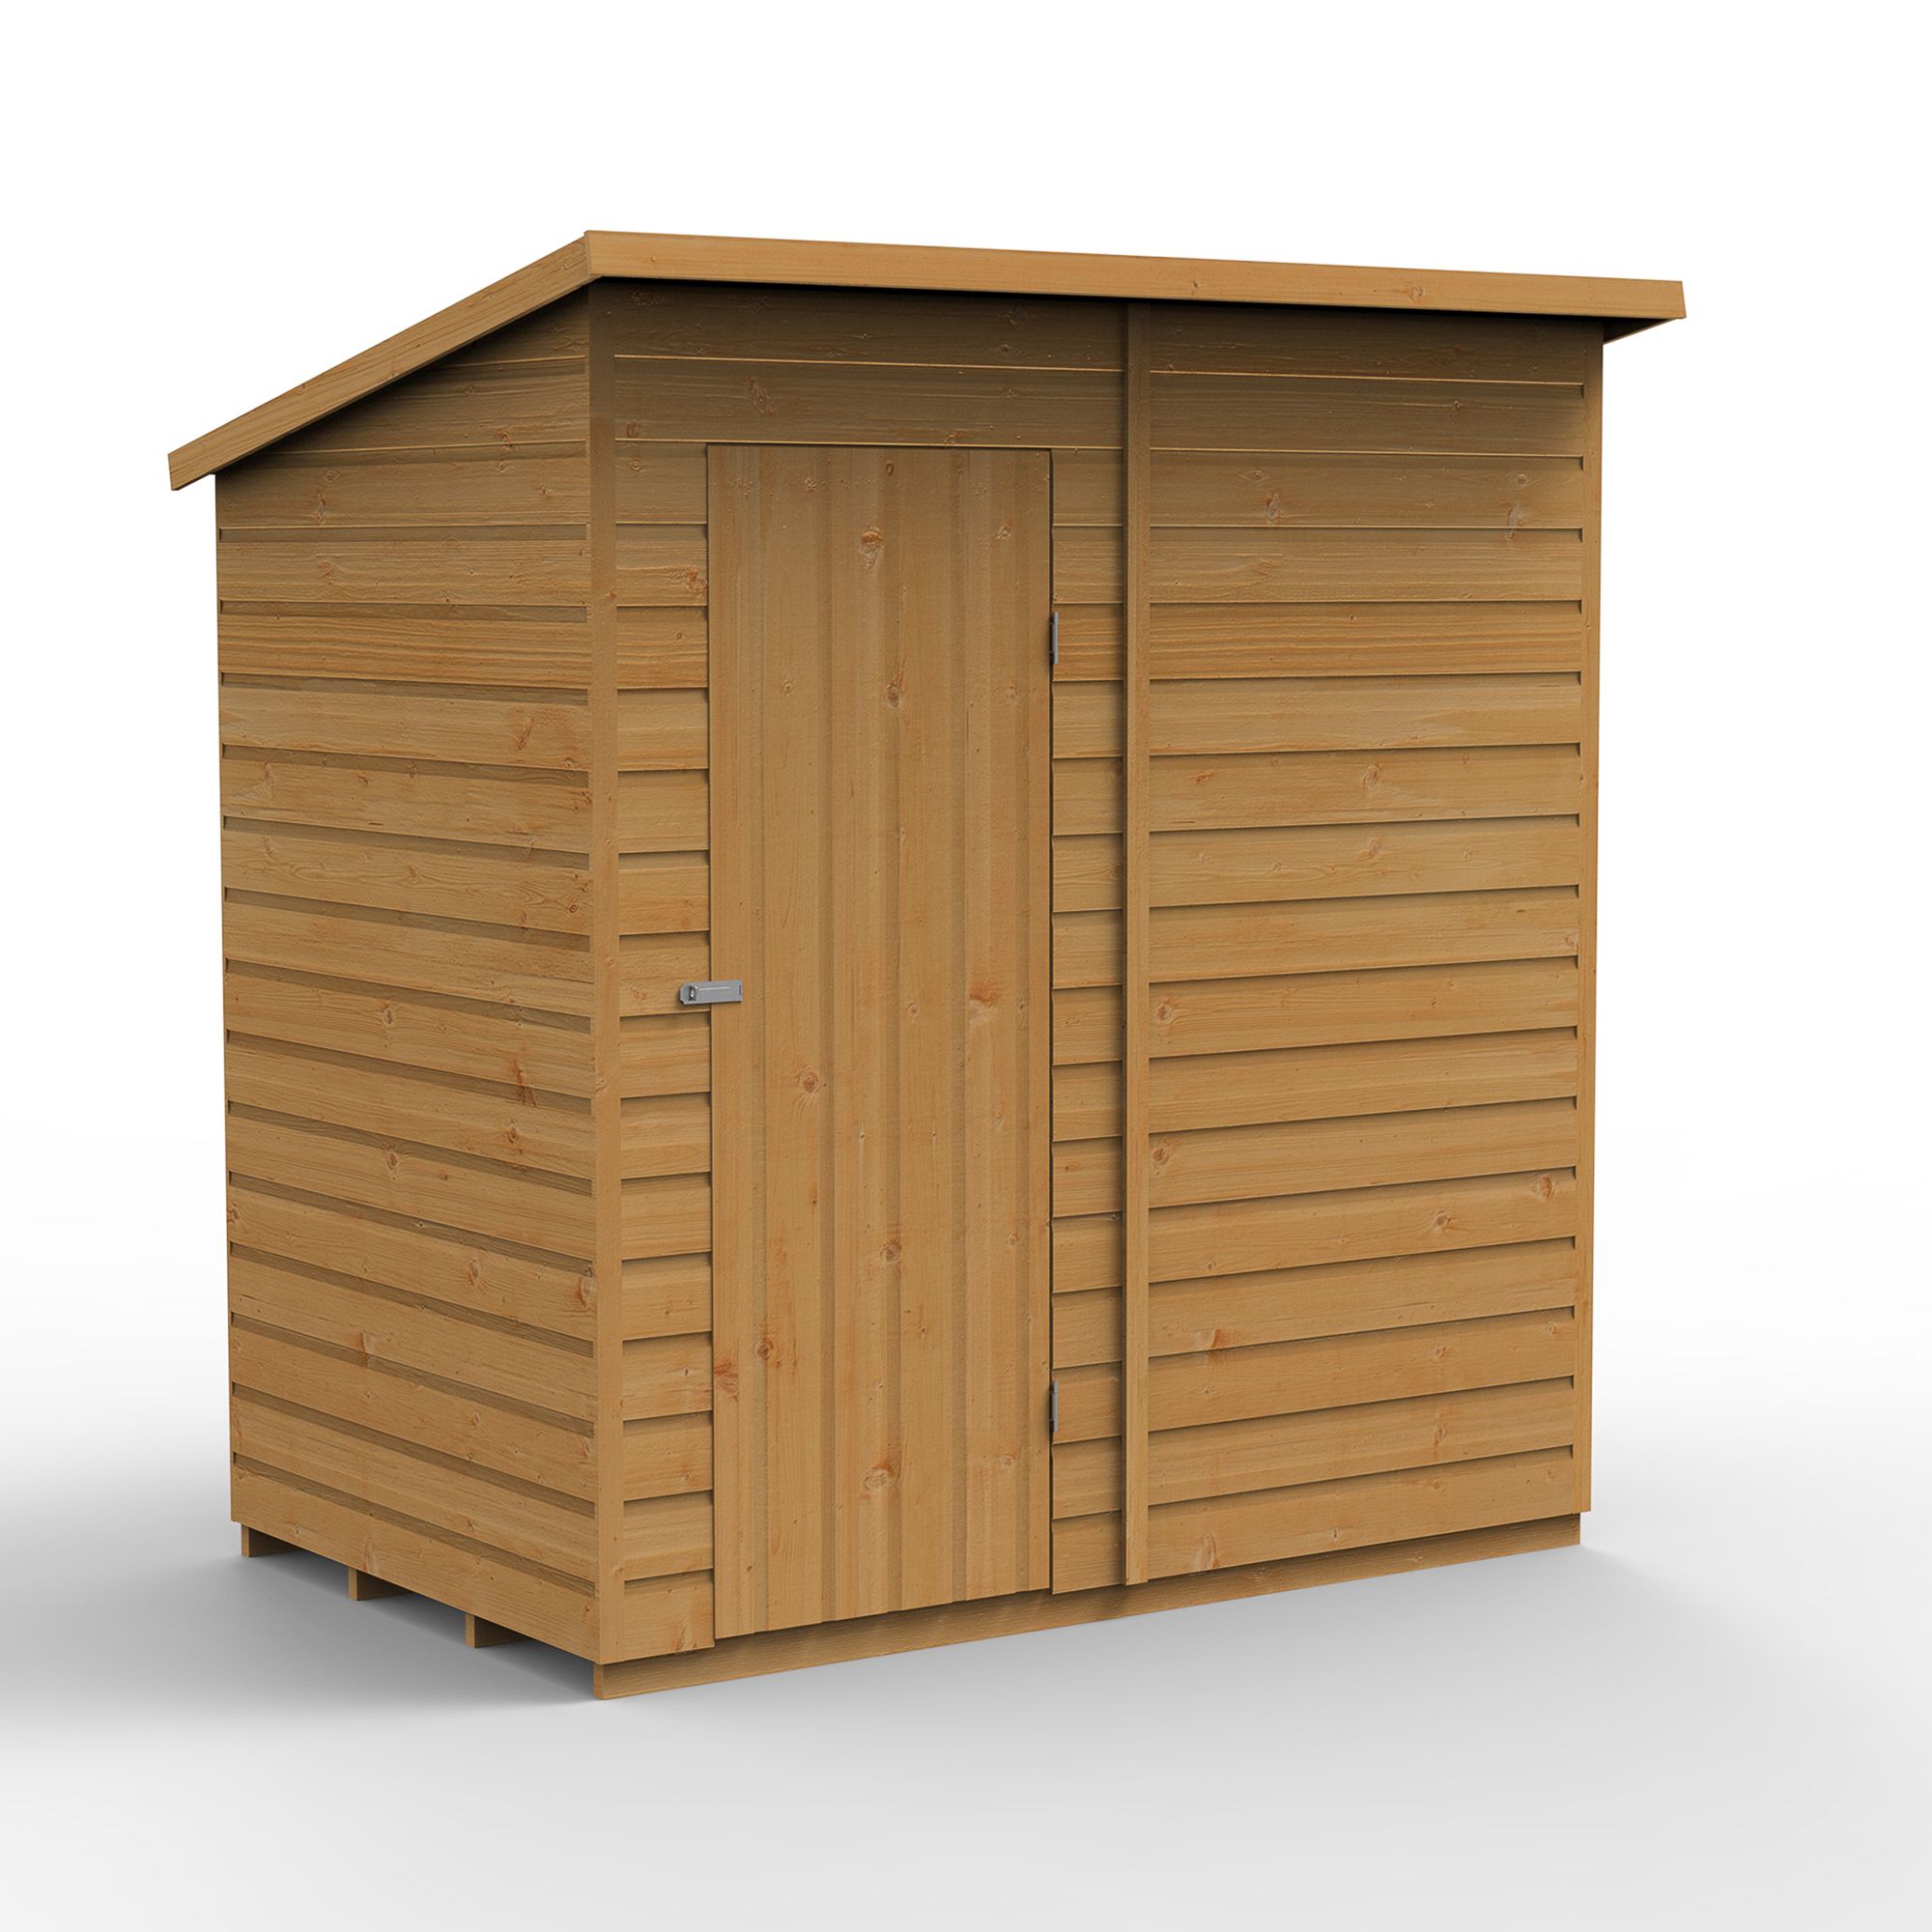 Forest Garden Shiplap 6x4 ft Pent Wooden Shed with floor - Assembly service included